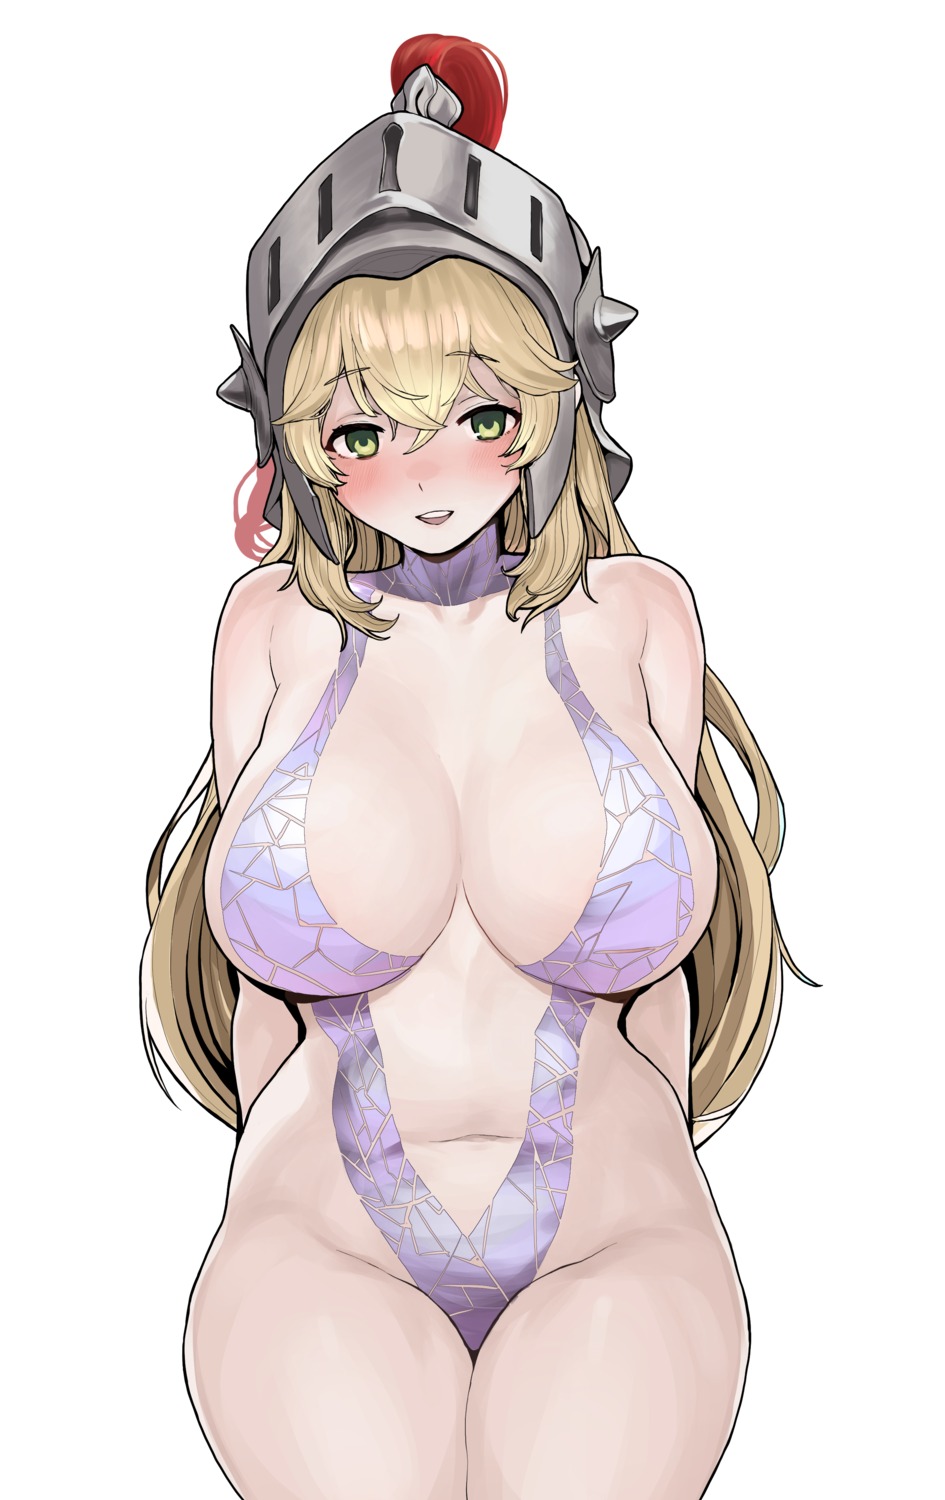 armor chroong guardian_tales swimsuits